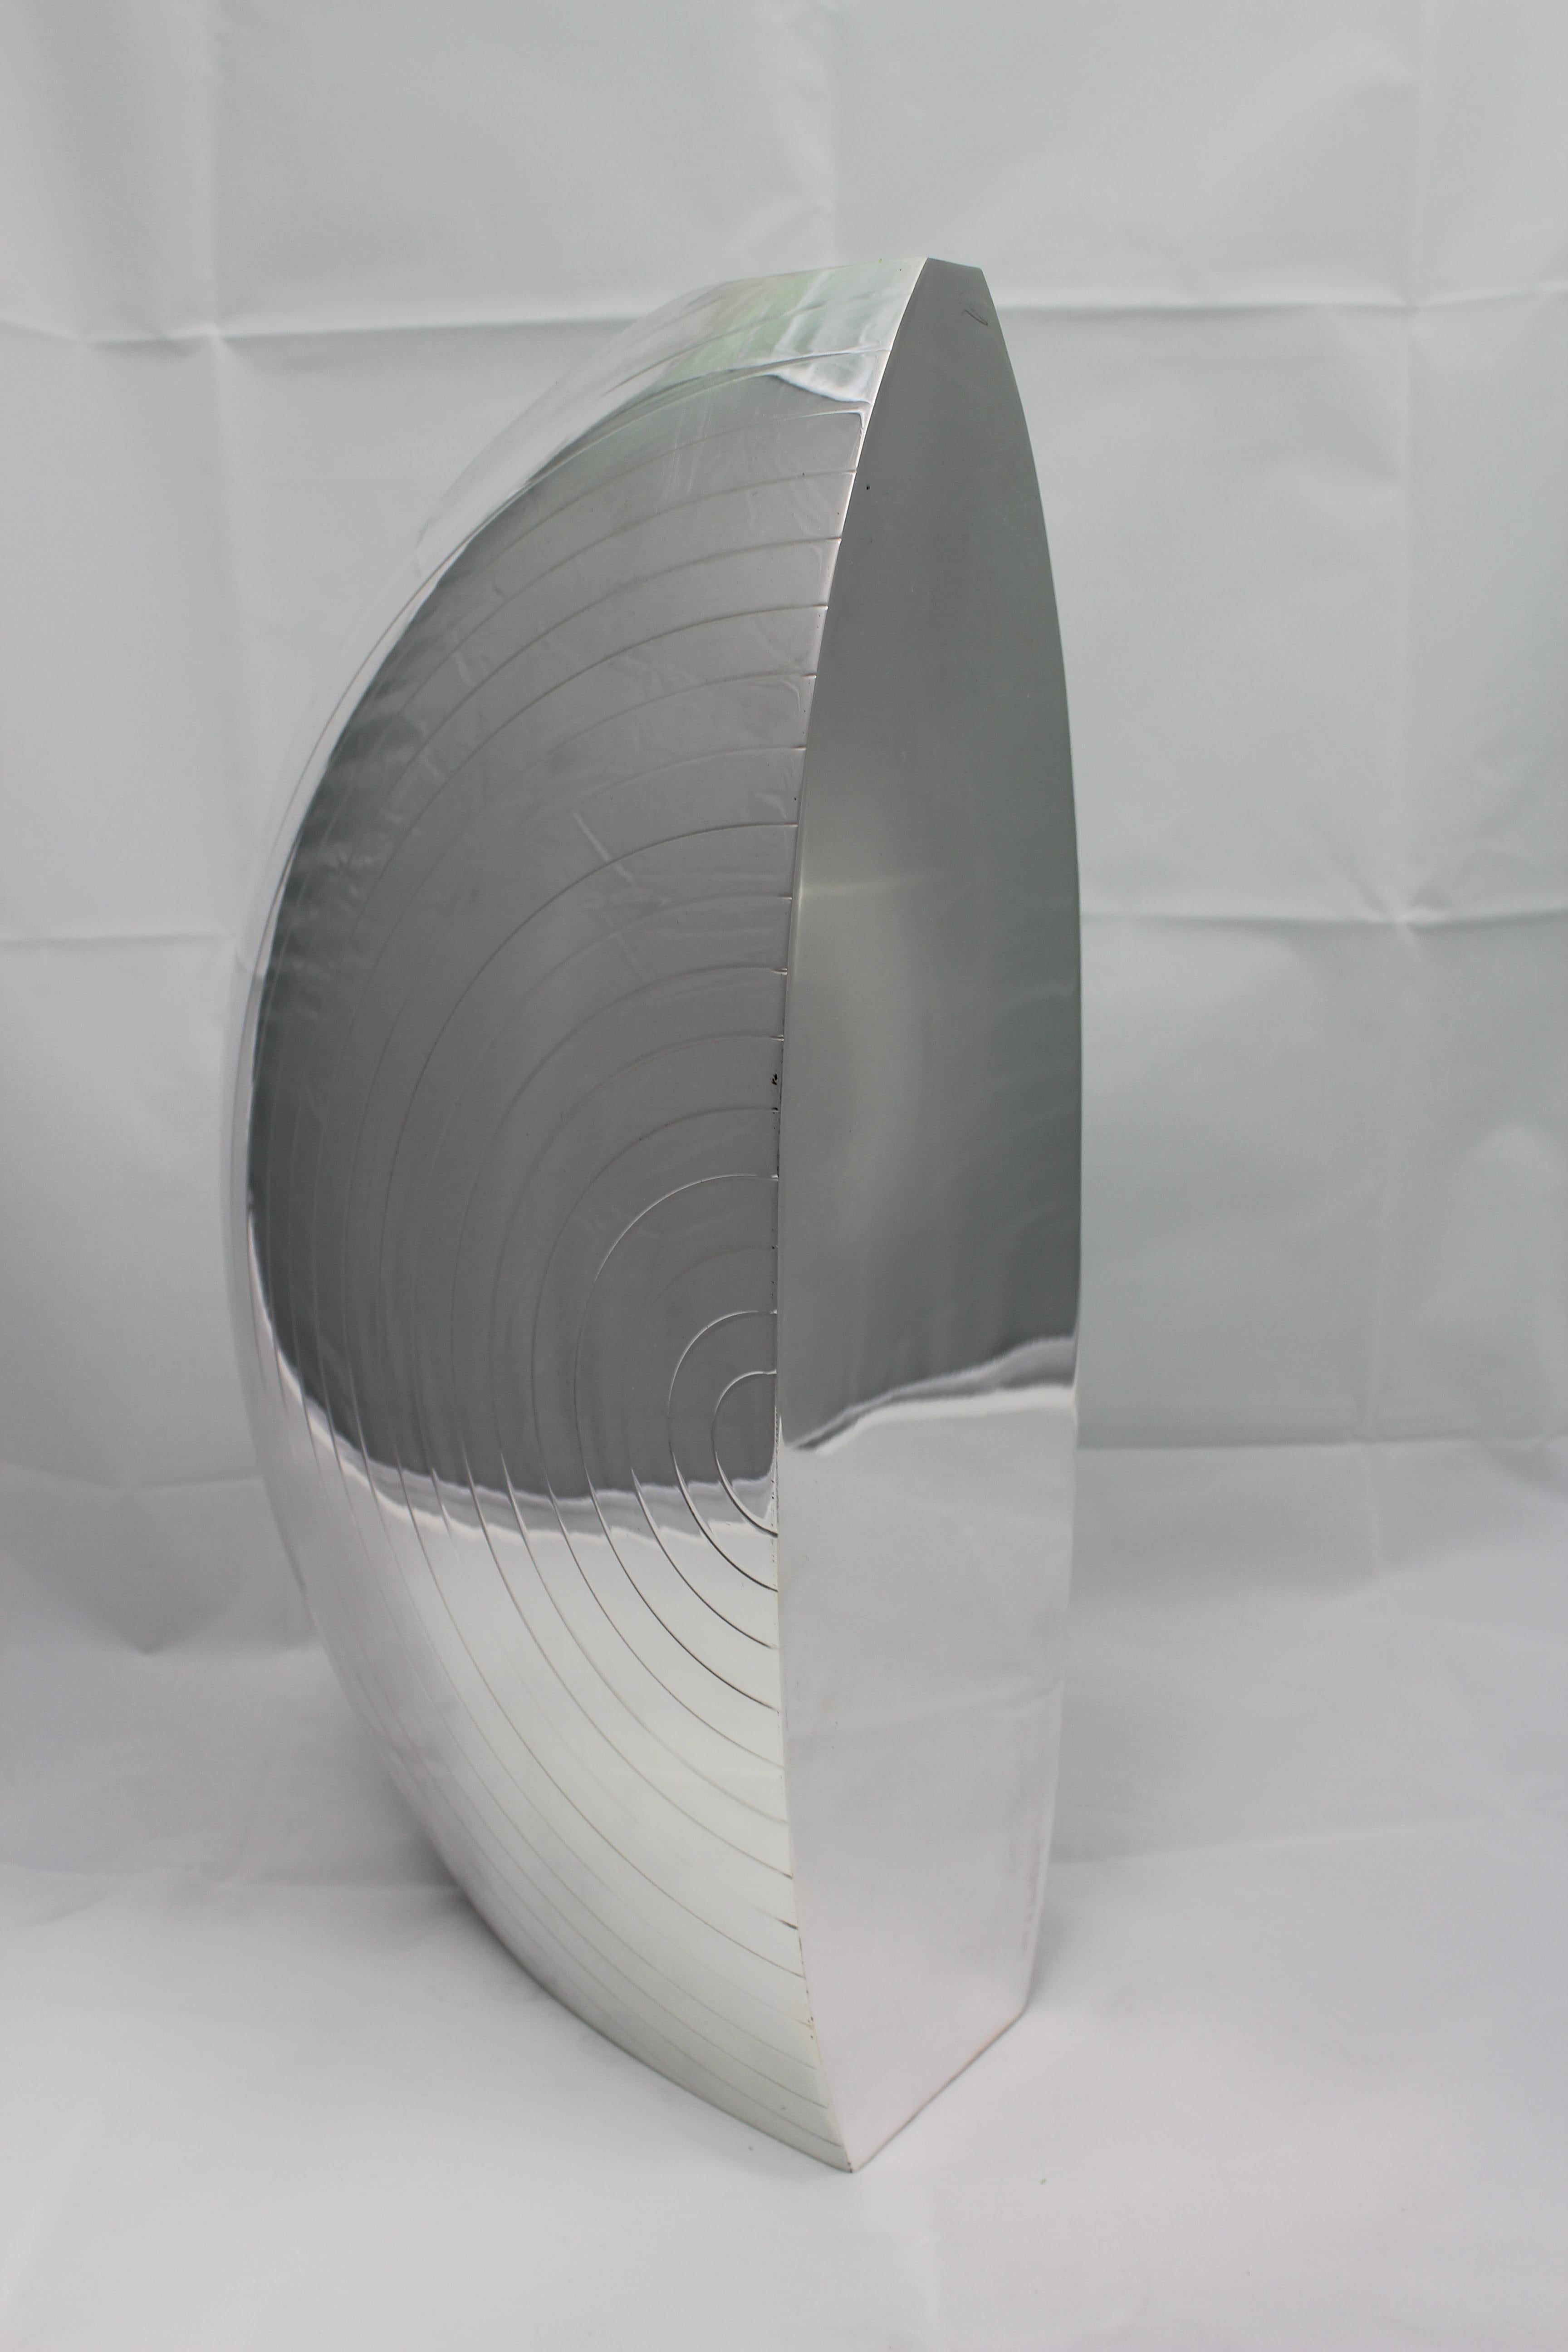 Wonderful futurist vase realized circa 1920s in Milan, Italy, by the silversmith Luigi Diani.

Sail shaped and decorated with circular lines on both large sides. The third side is completely smooth. 

Unique design and model derived from